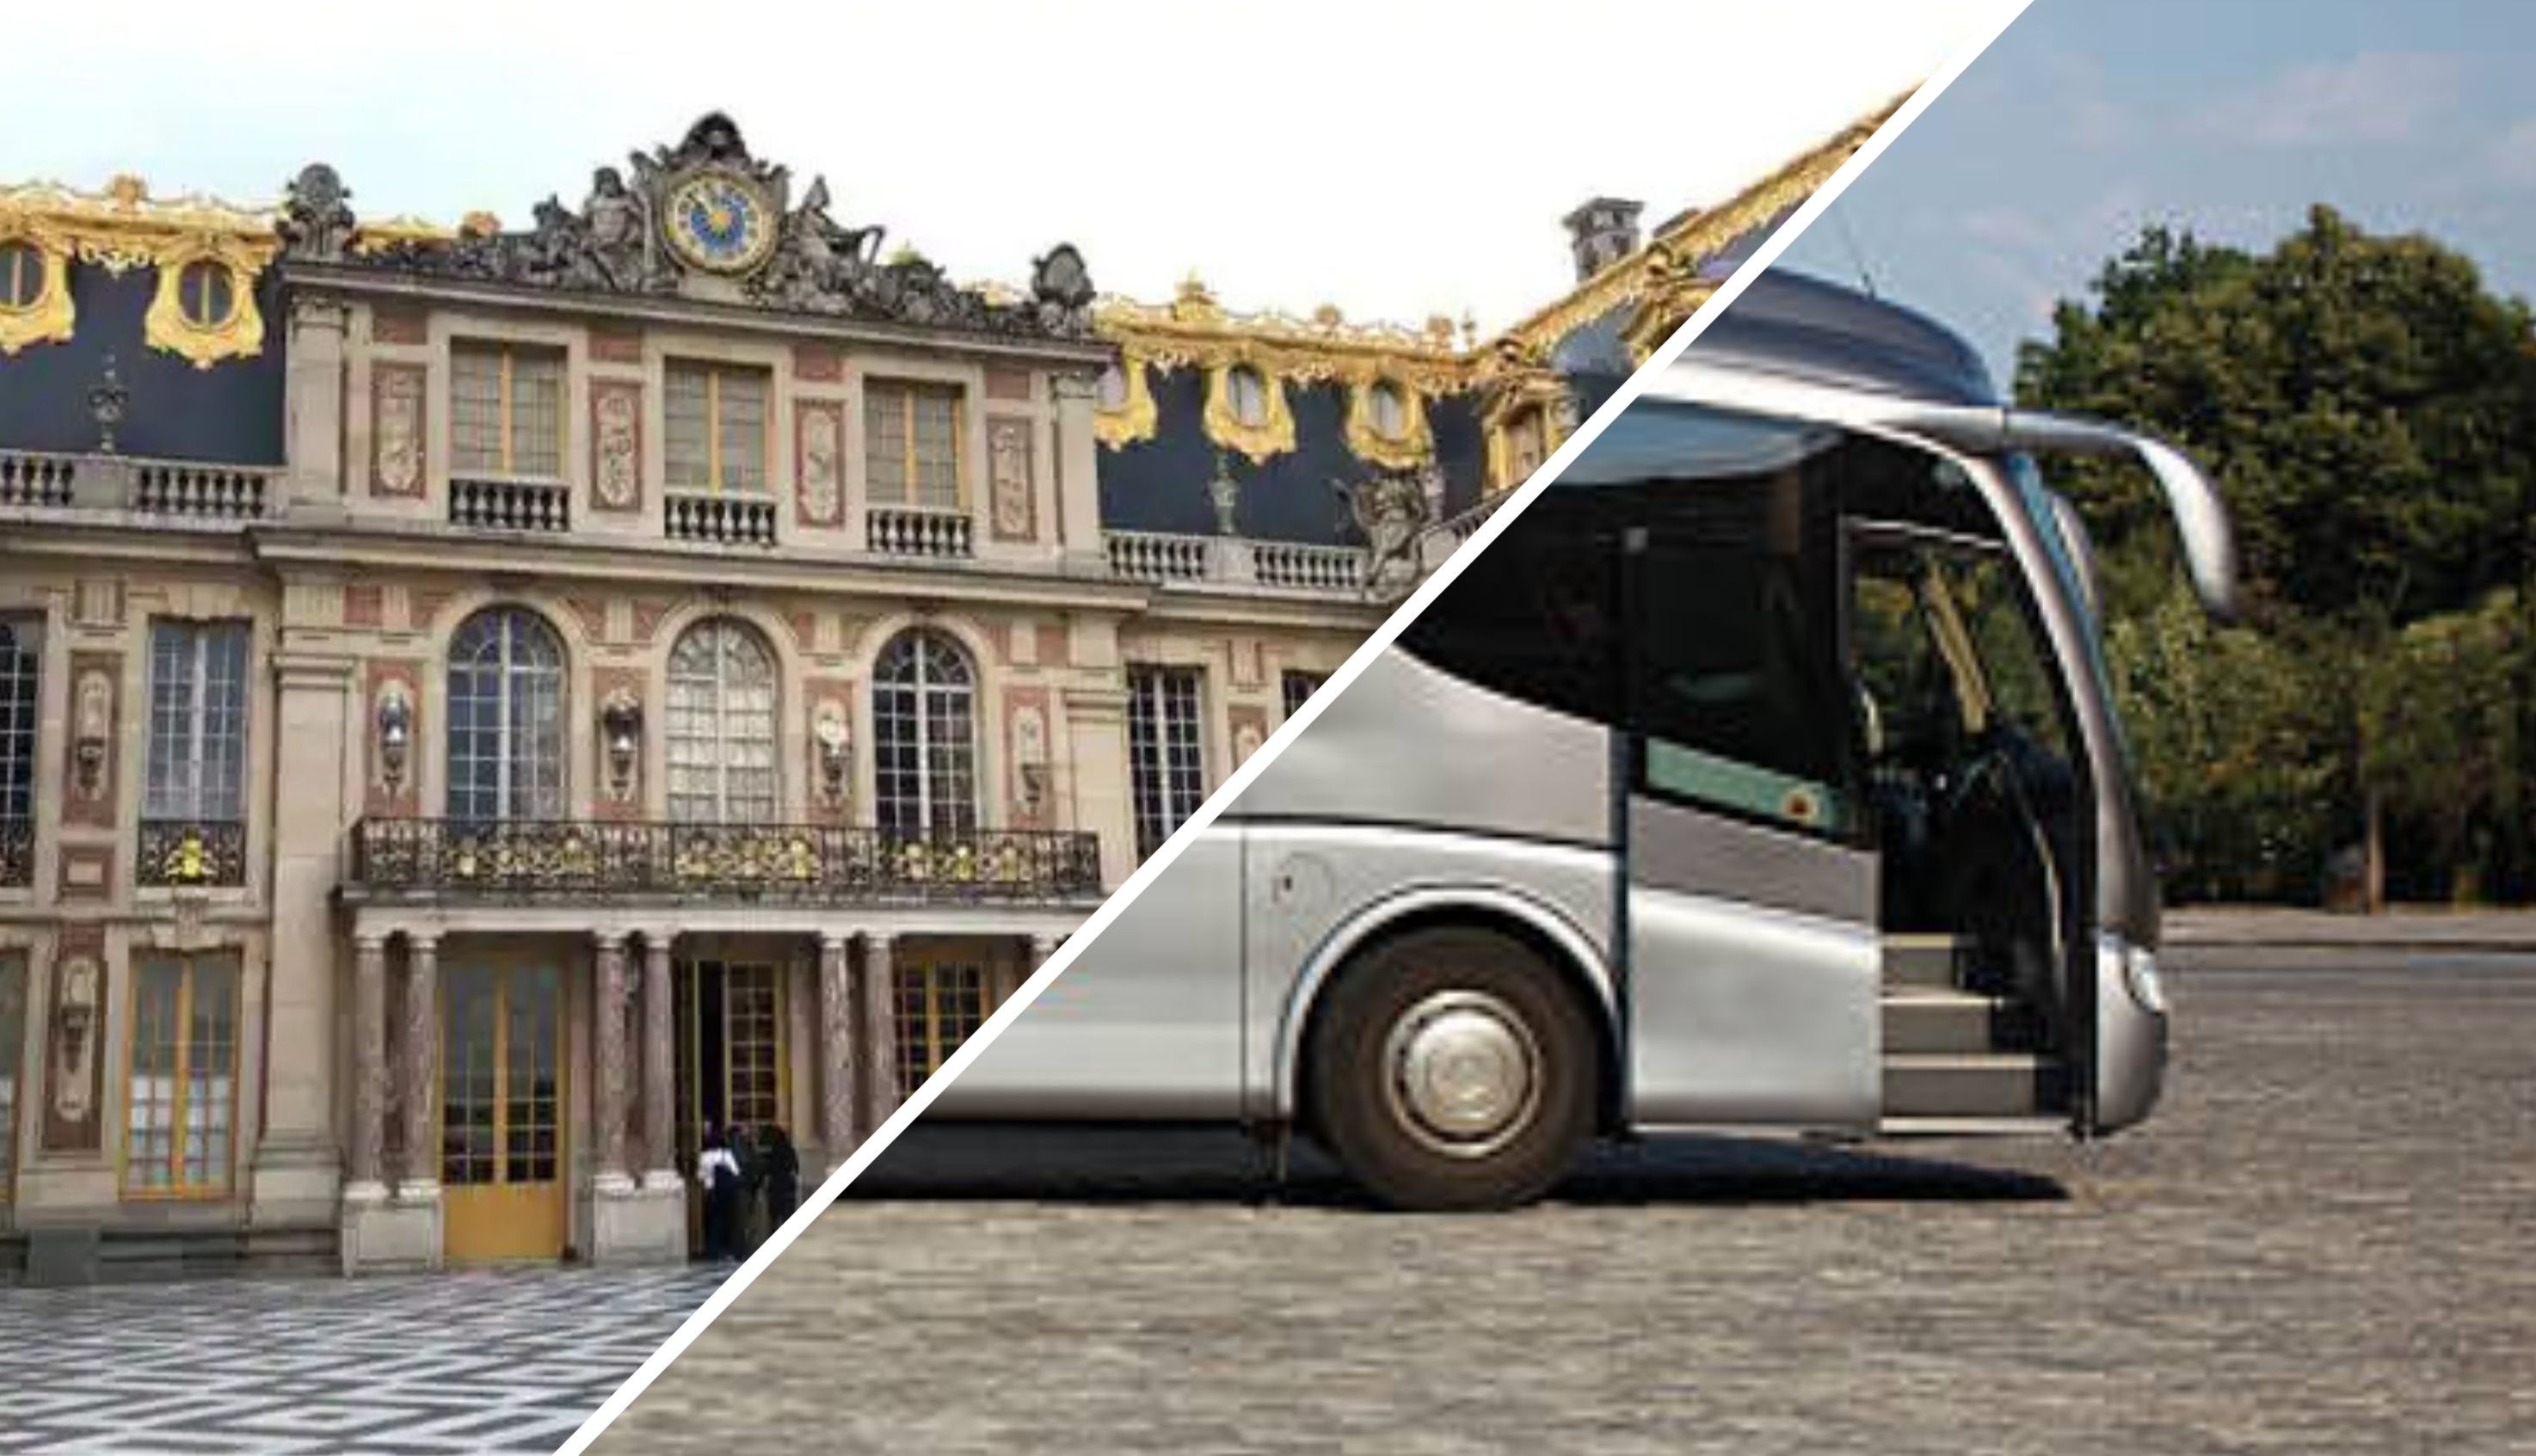 Half Day Audio Guided Tour of the Palace of Versailles from Paris with transportation